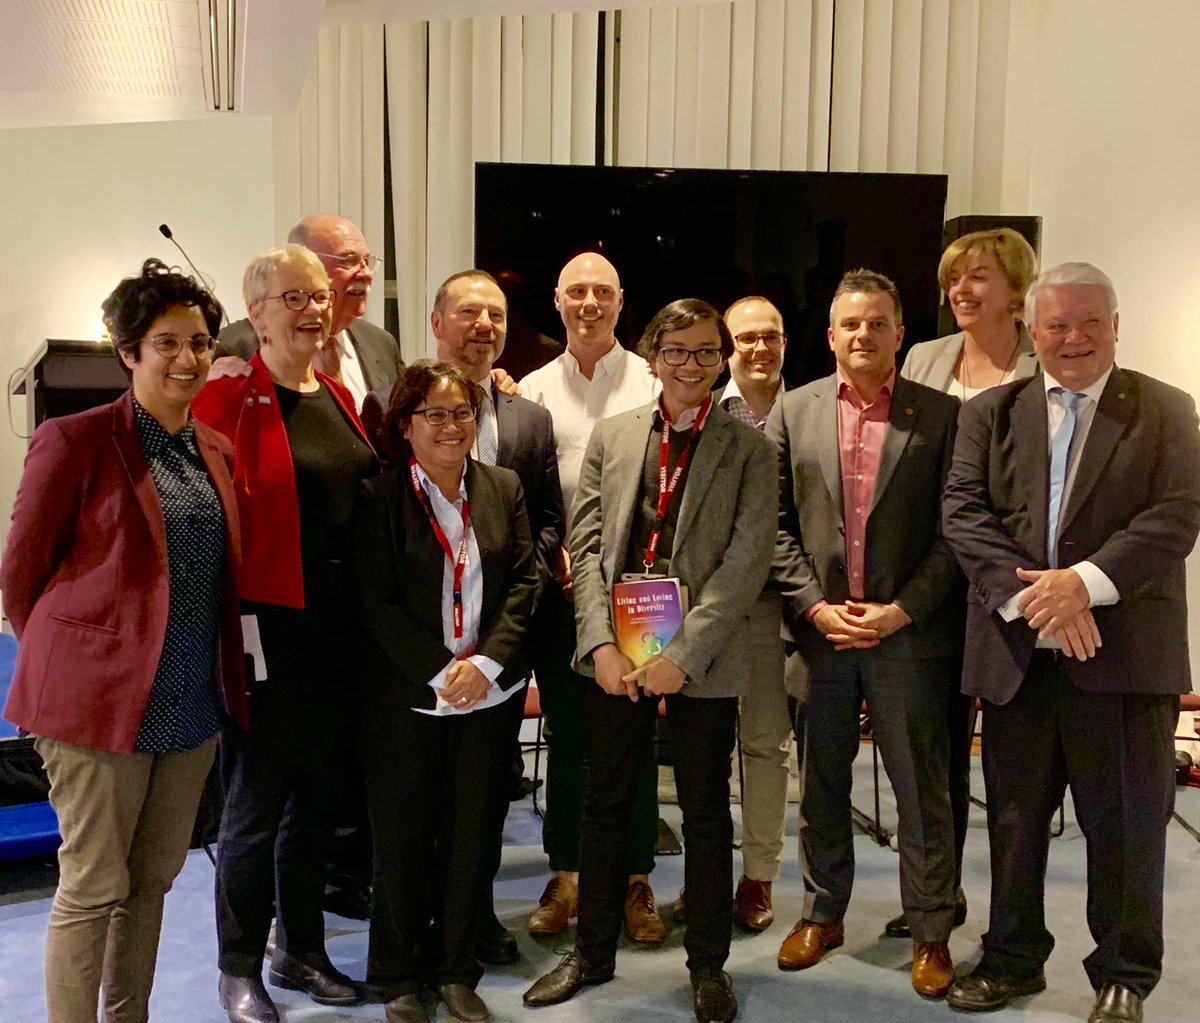 I MC’d the Parliamentary Friendship Group for LGBTIQ+ Australians event tonight for LGBTIQ+ people of faith and heard from 6 incredibly courageous, wise and intelligent people about how the proposed Religious Discrimination Act could impact their lives and communities. Thanks all